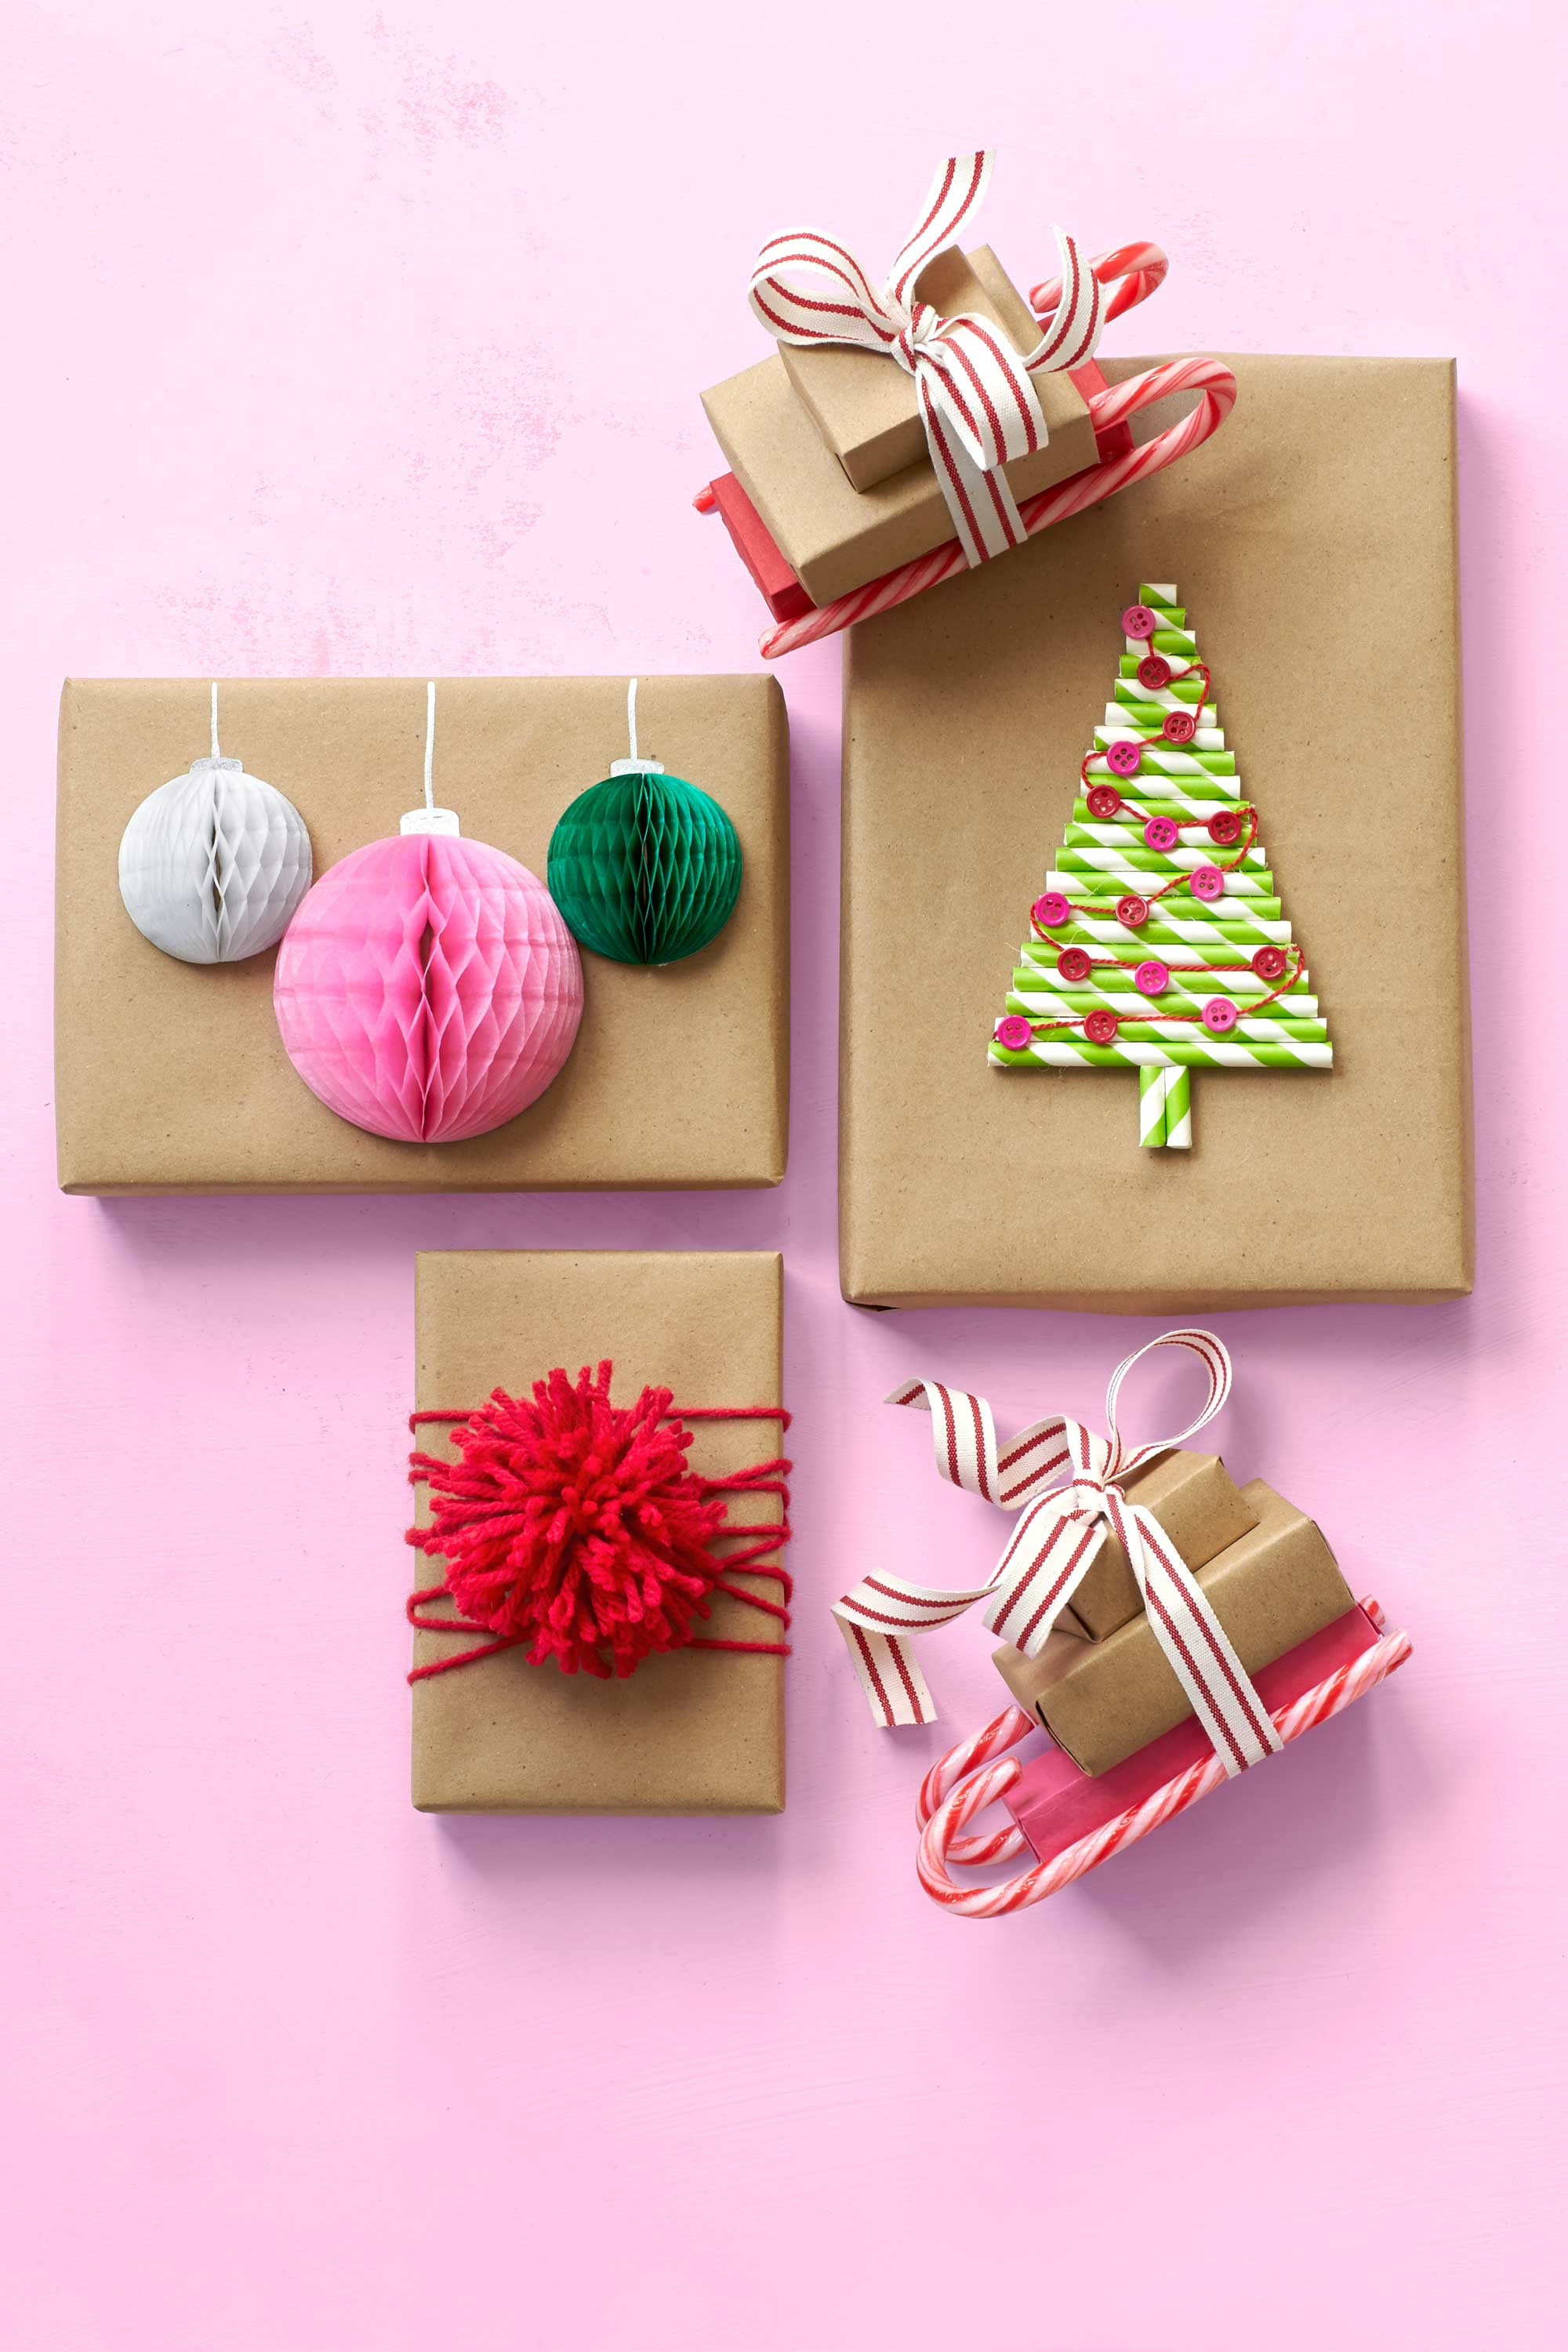 Gift Wrapping Ideas For Christmas
 30 Unique Gift Wrapping Ideas for Christmas How to Wrap